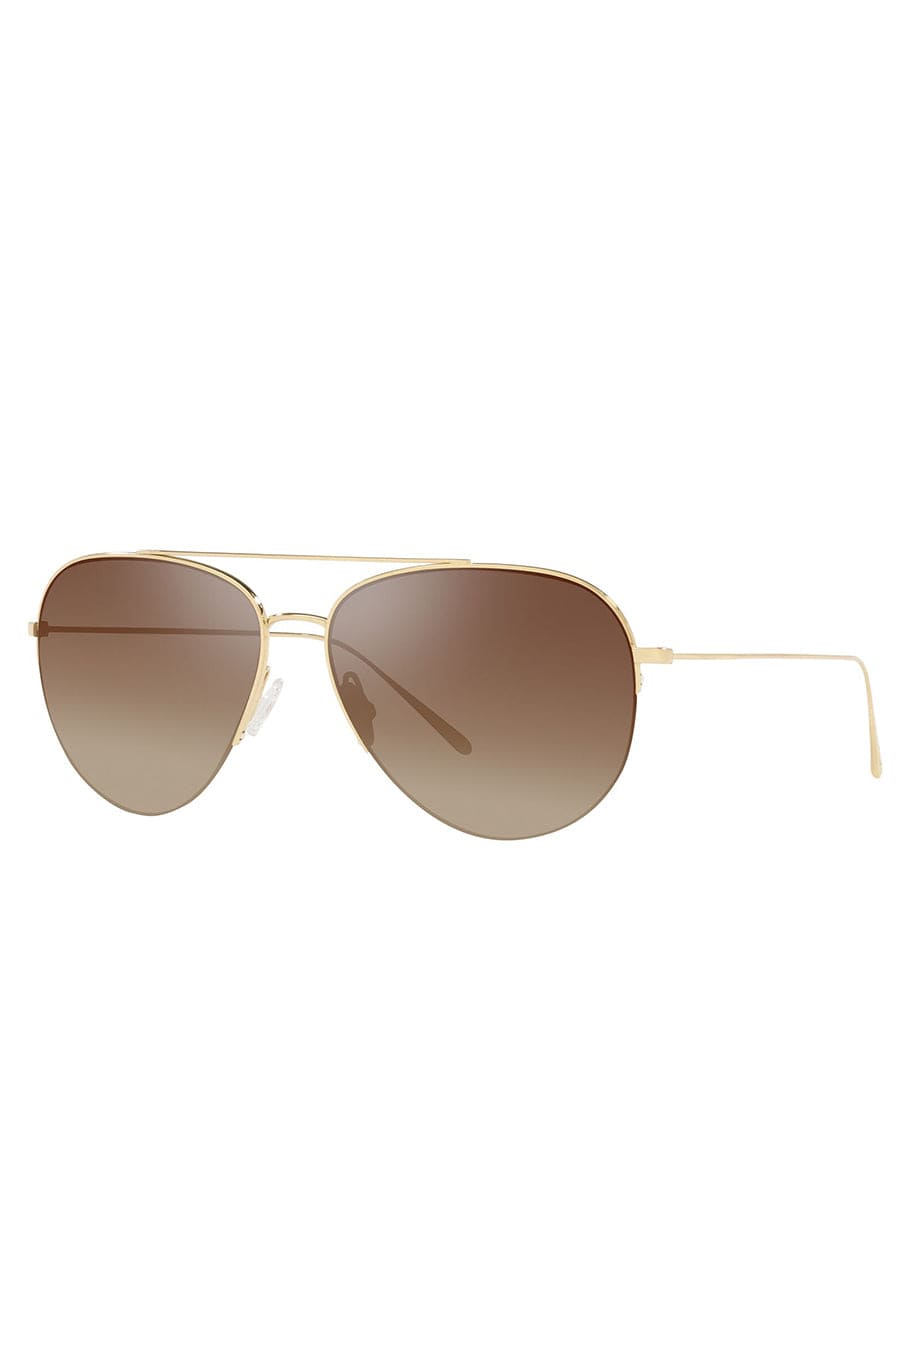 OLIVER PEOPLES-Cleamons Sunglasses-GOLD BROWN